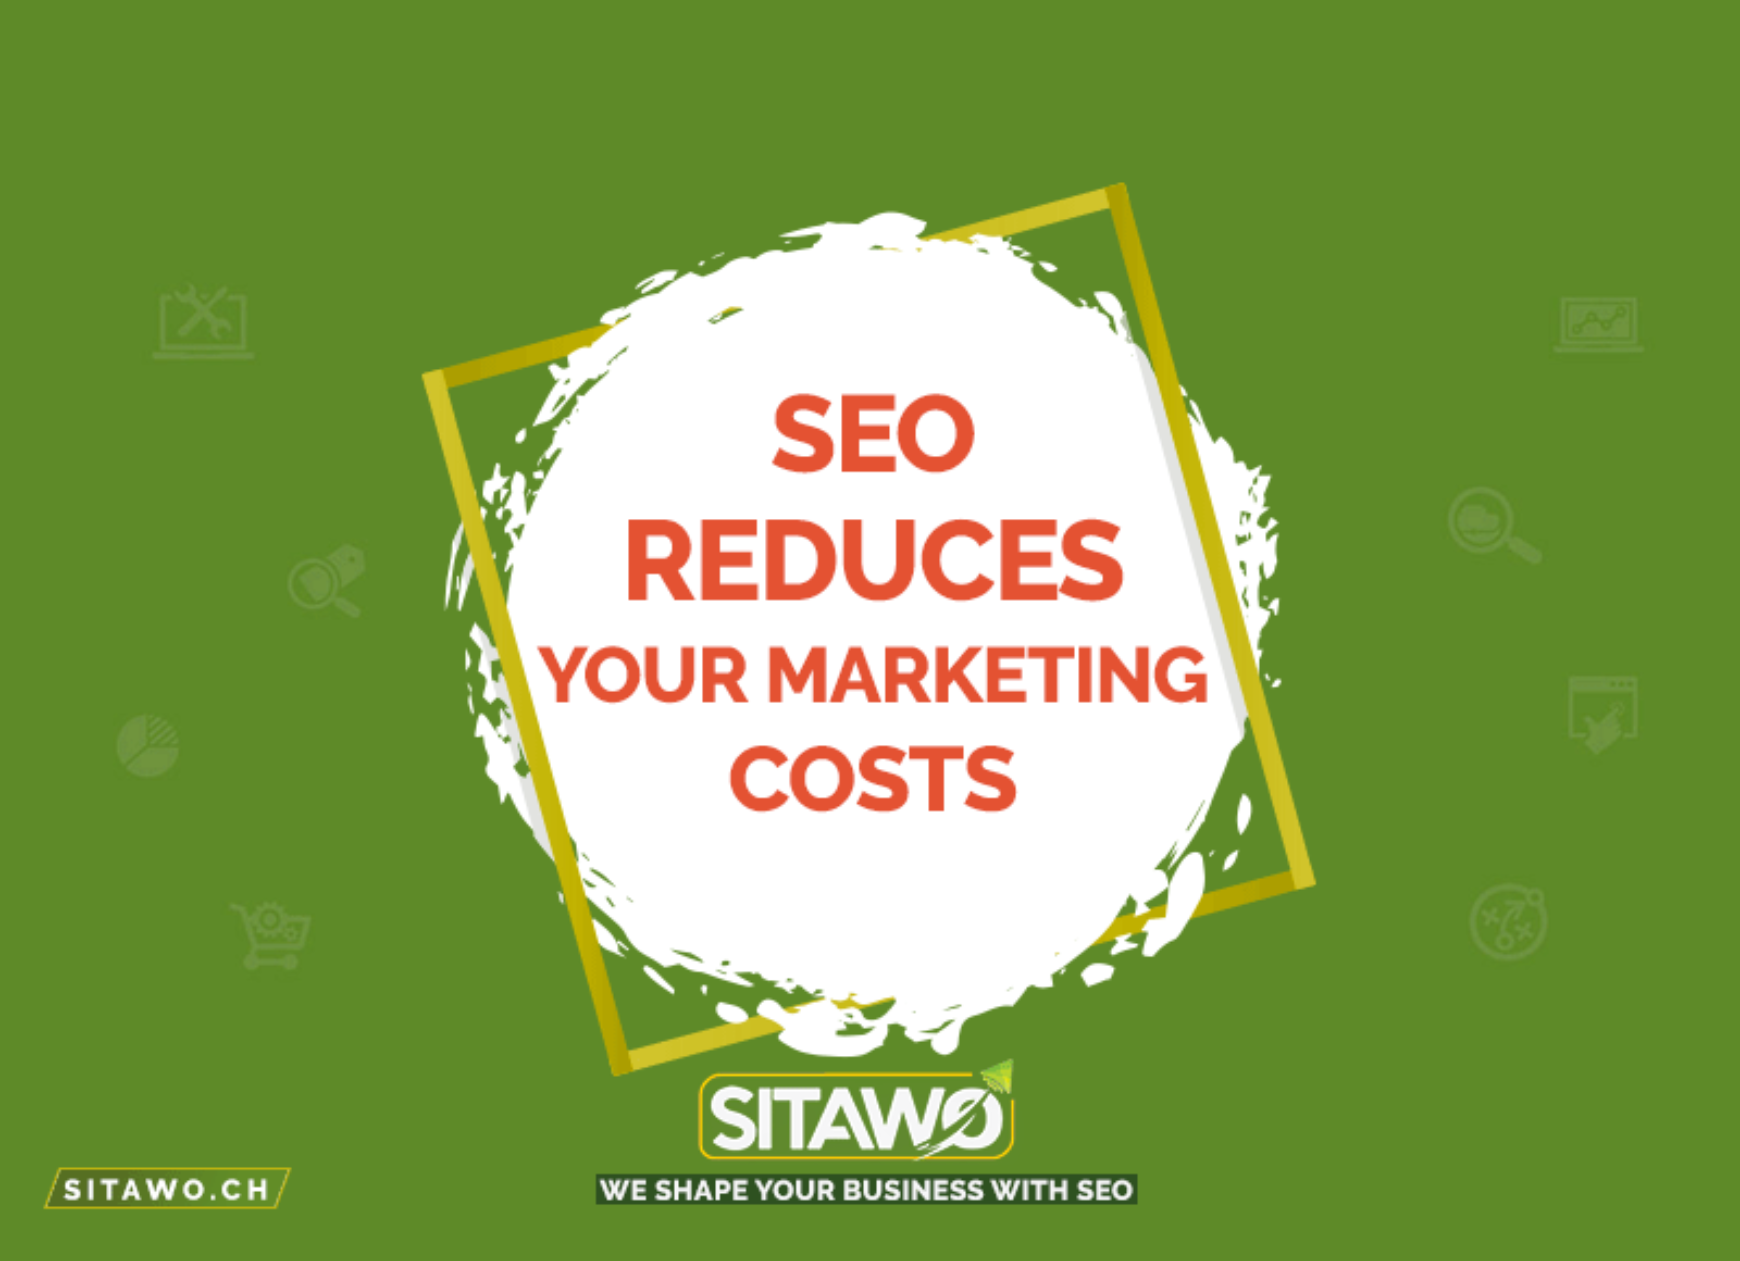 Why SEO is Cost Effective?